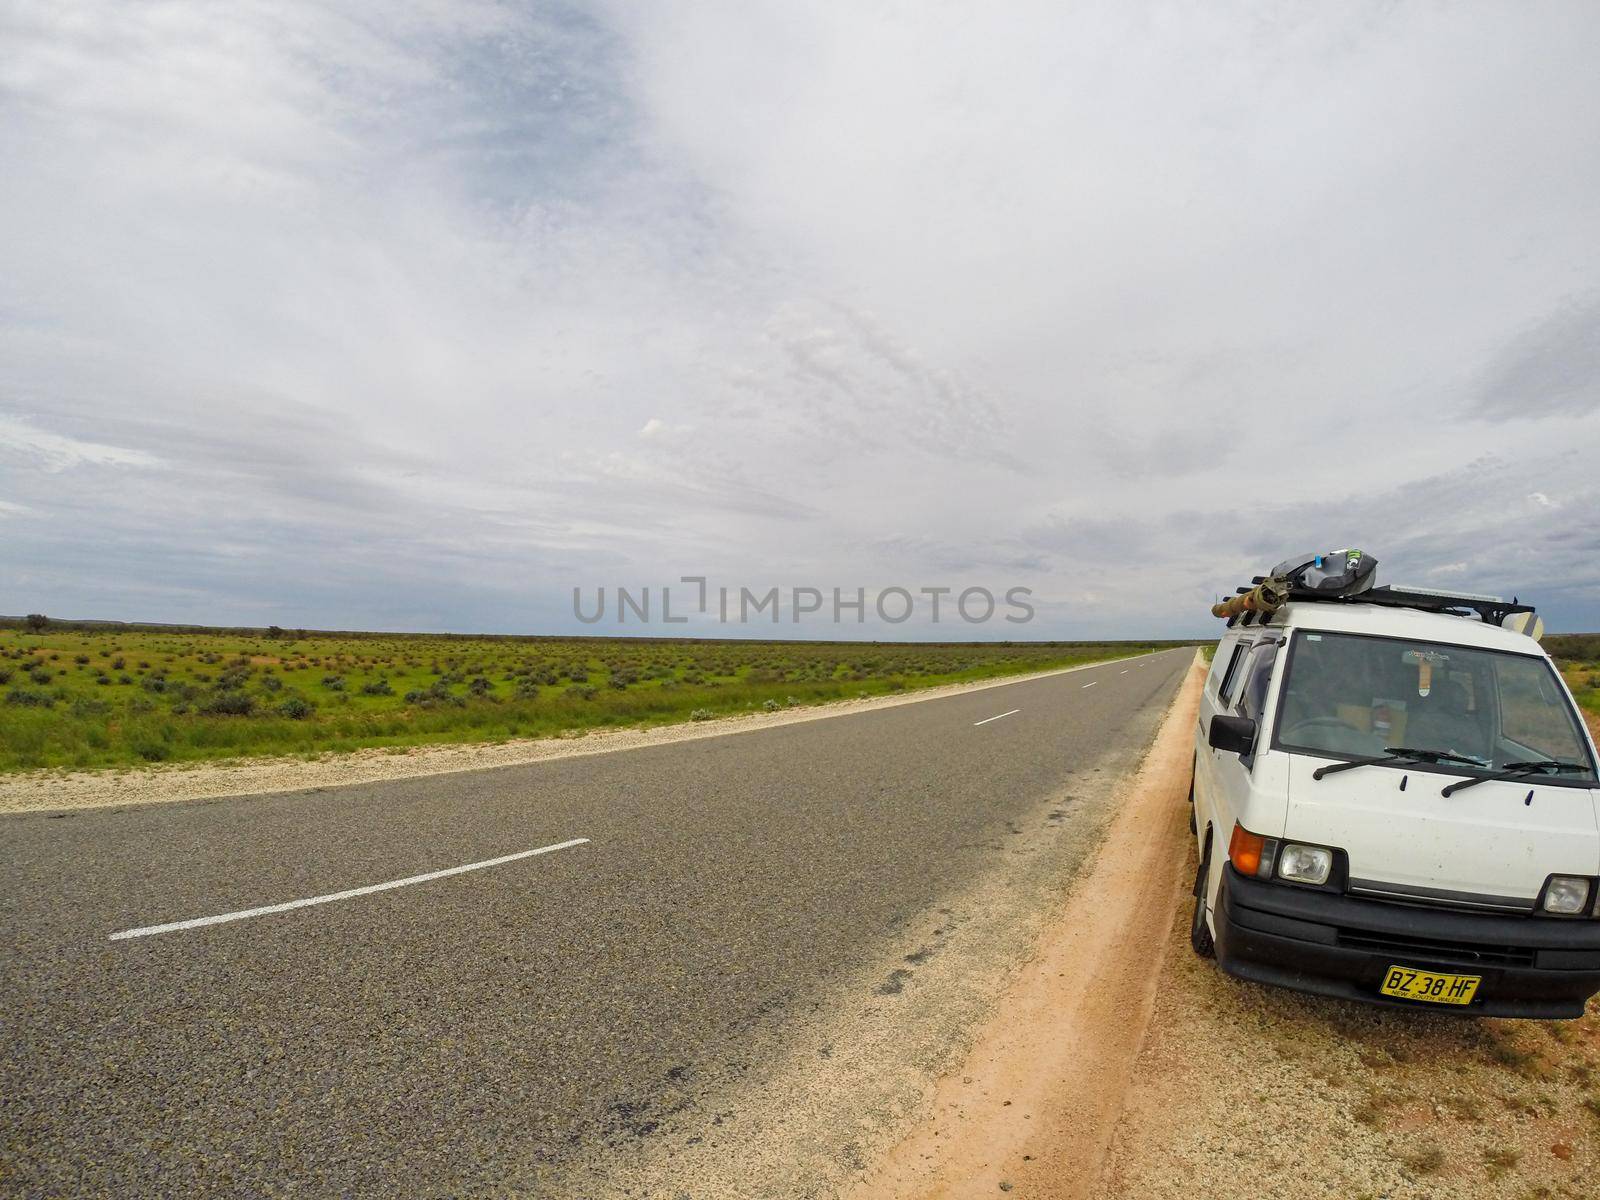 van parking on a straight road with dessert on the Burkett Road south of Exmouth of Western Australia, Australia by bettercallcurry